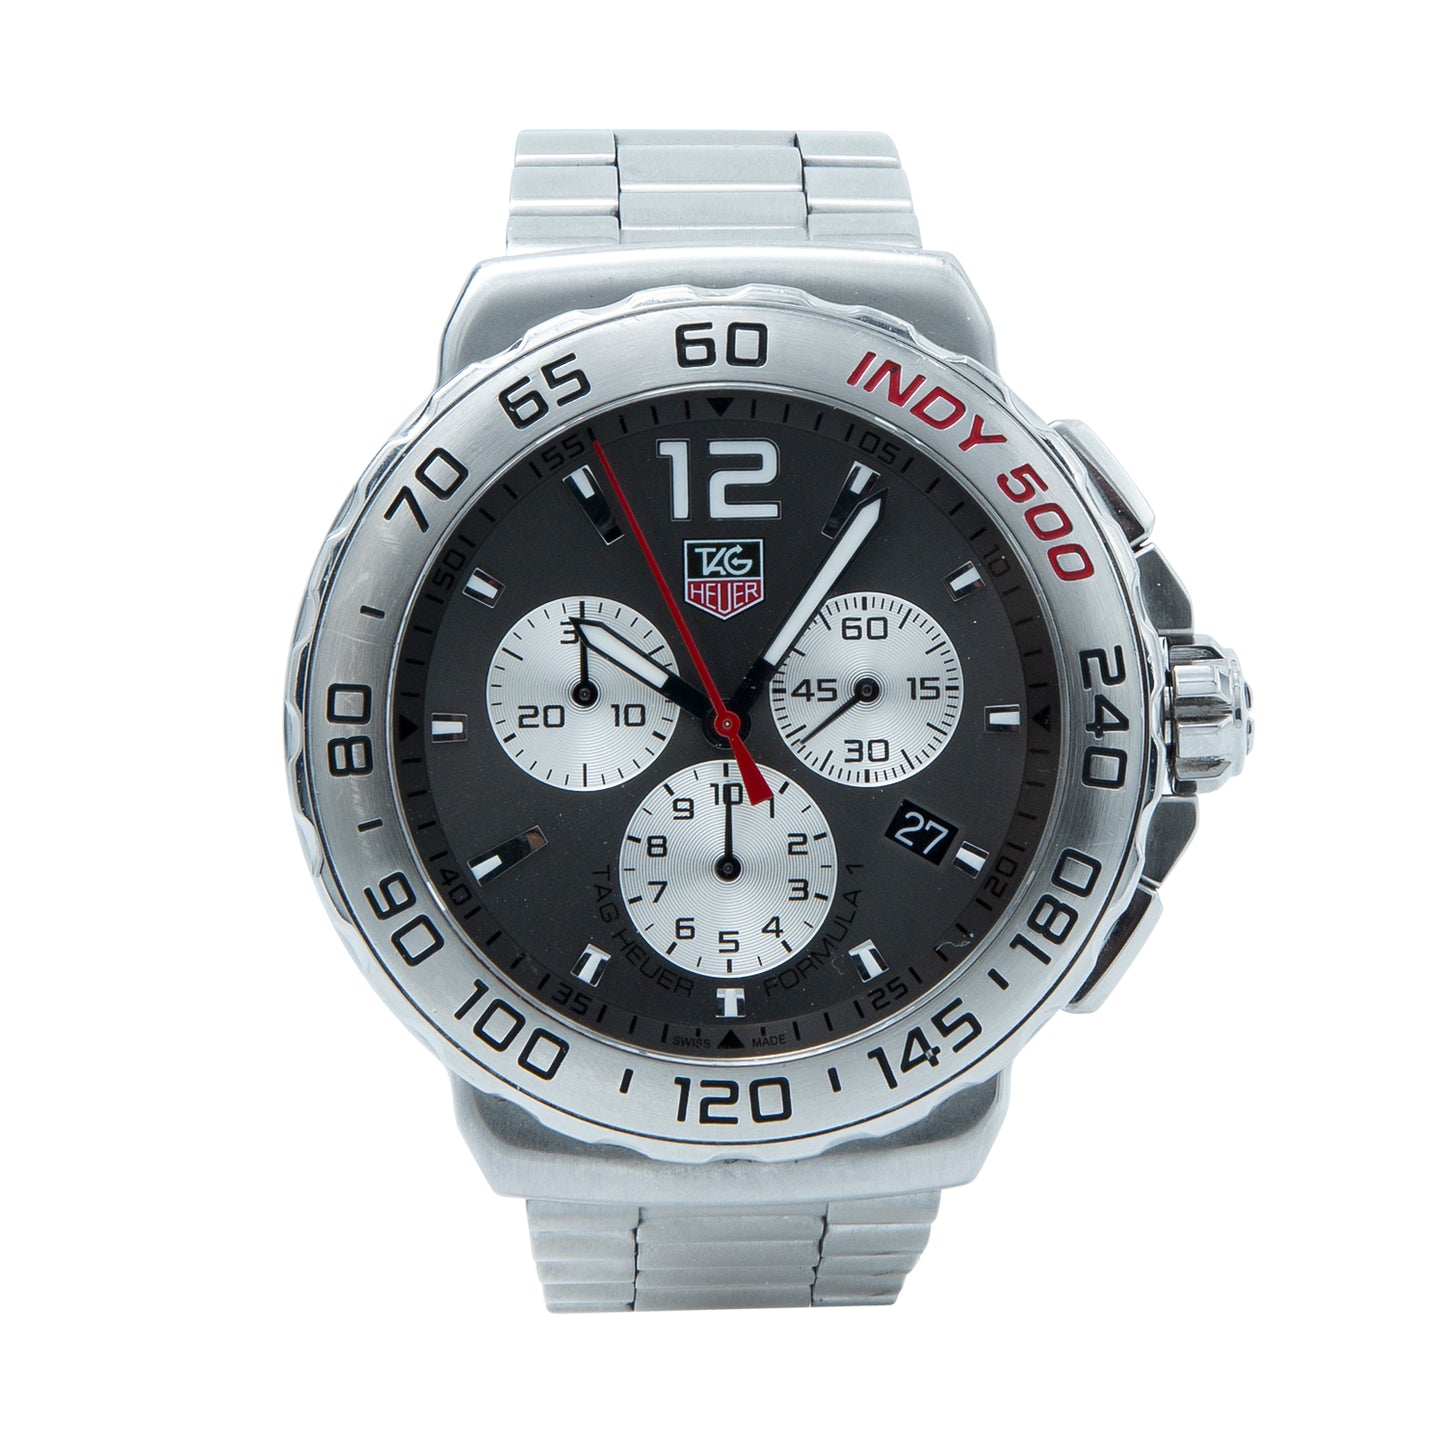 Tag Heuer F1 Indy 500